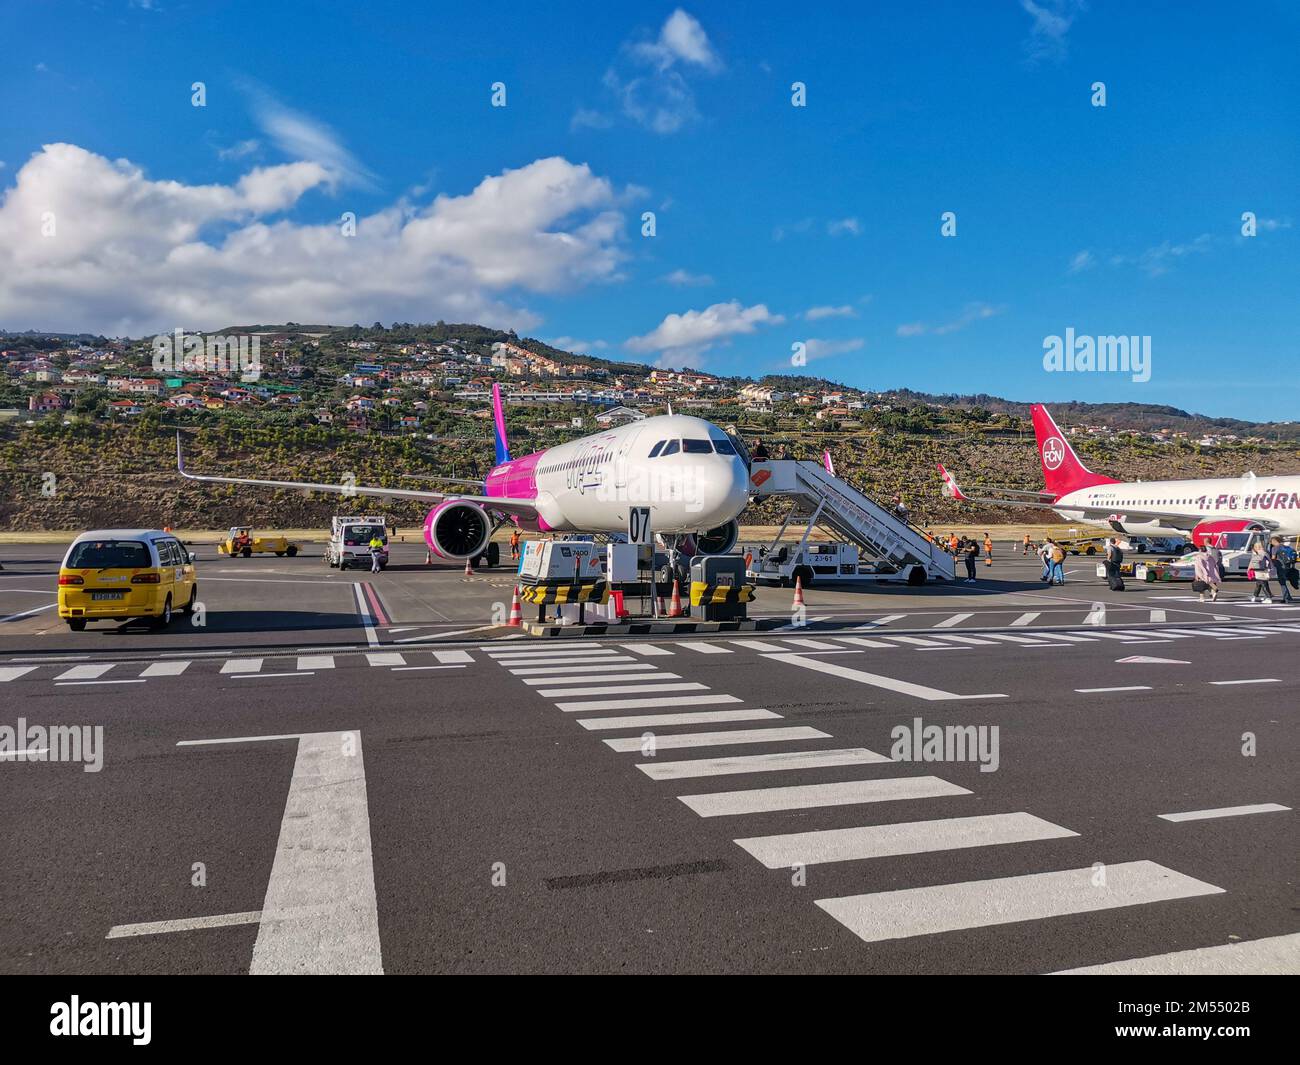 Airplanes at Funchal Airport, Madeira Island, Portugal. Boarding passengers on flight. Plane on background of mountains and houses. Runway strip Stock Photo